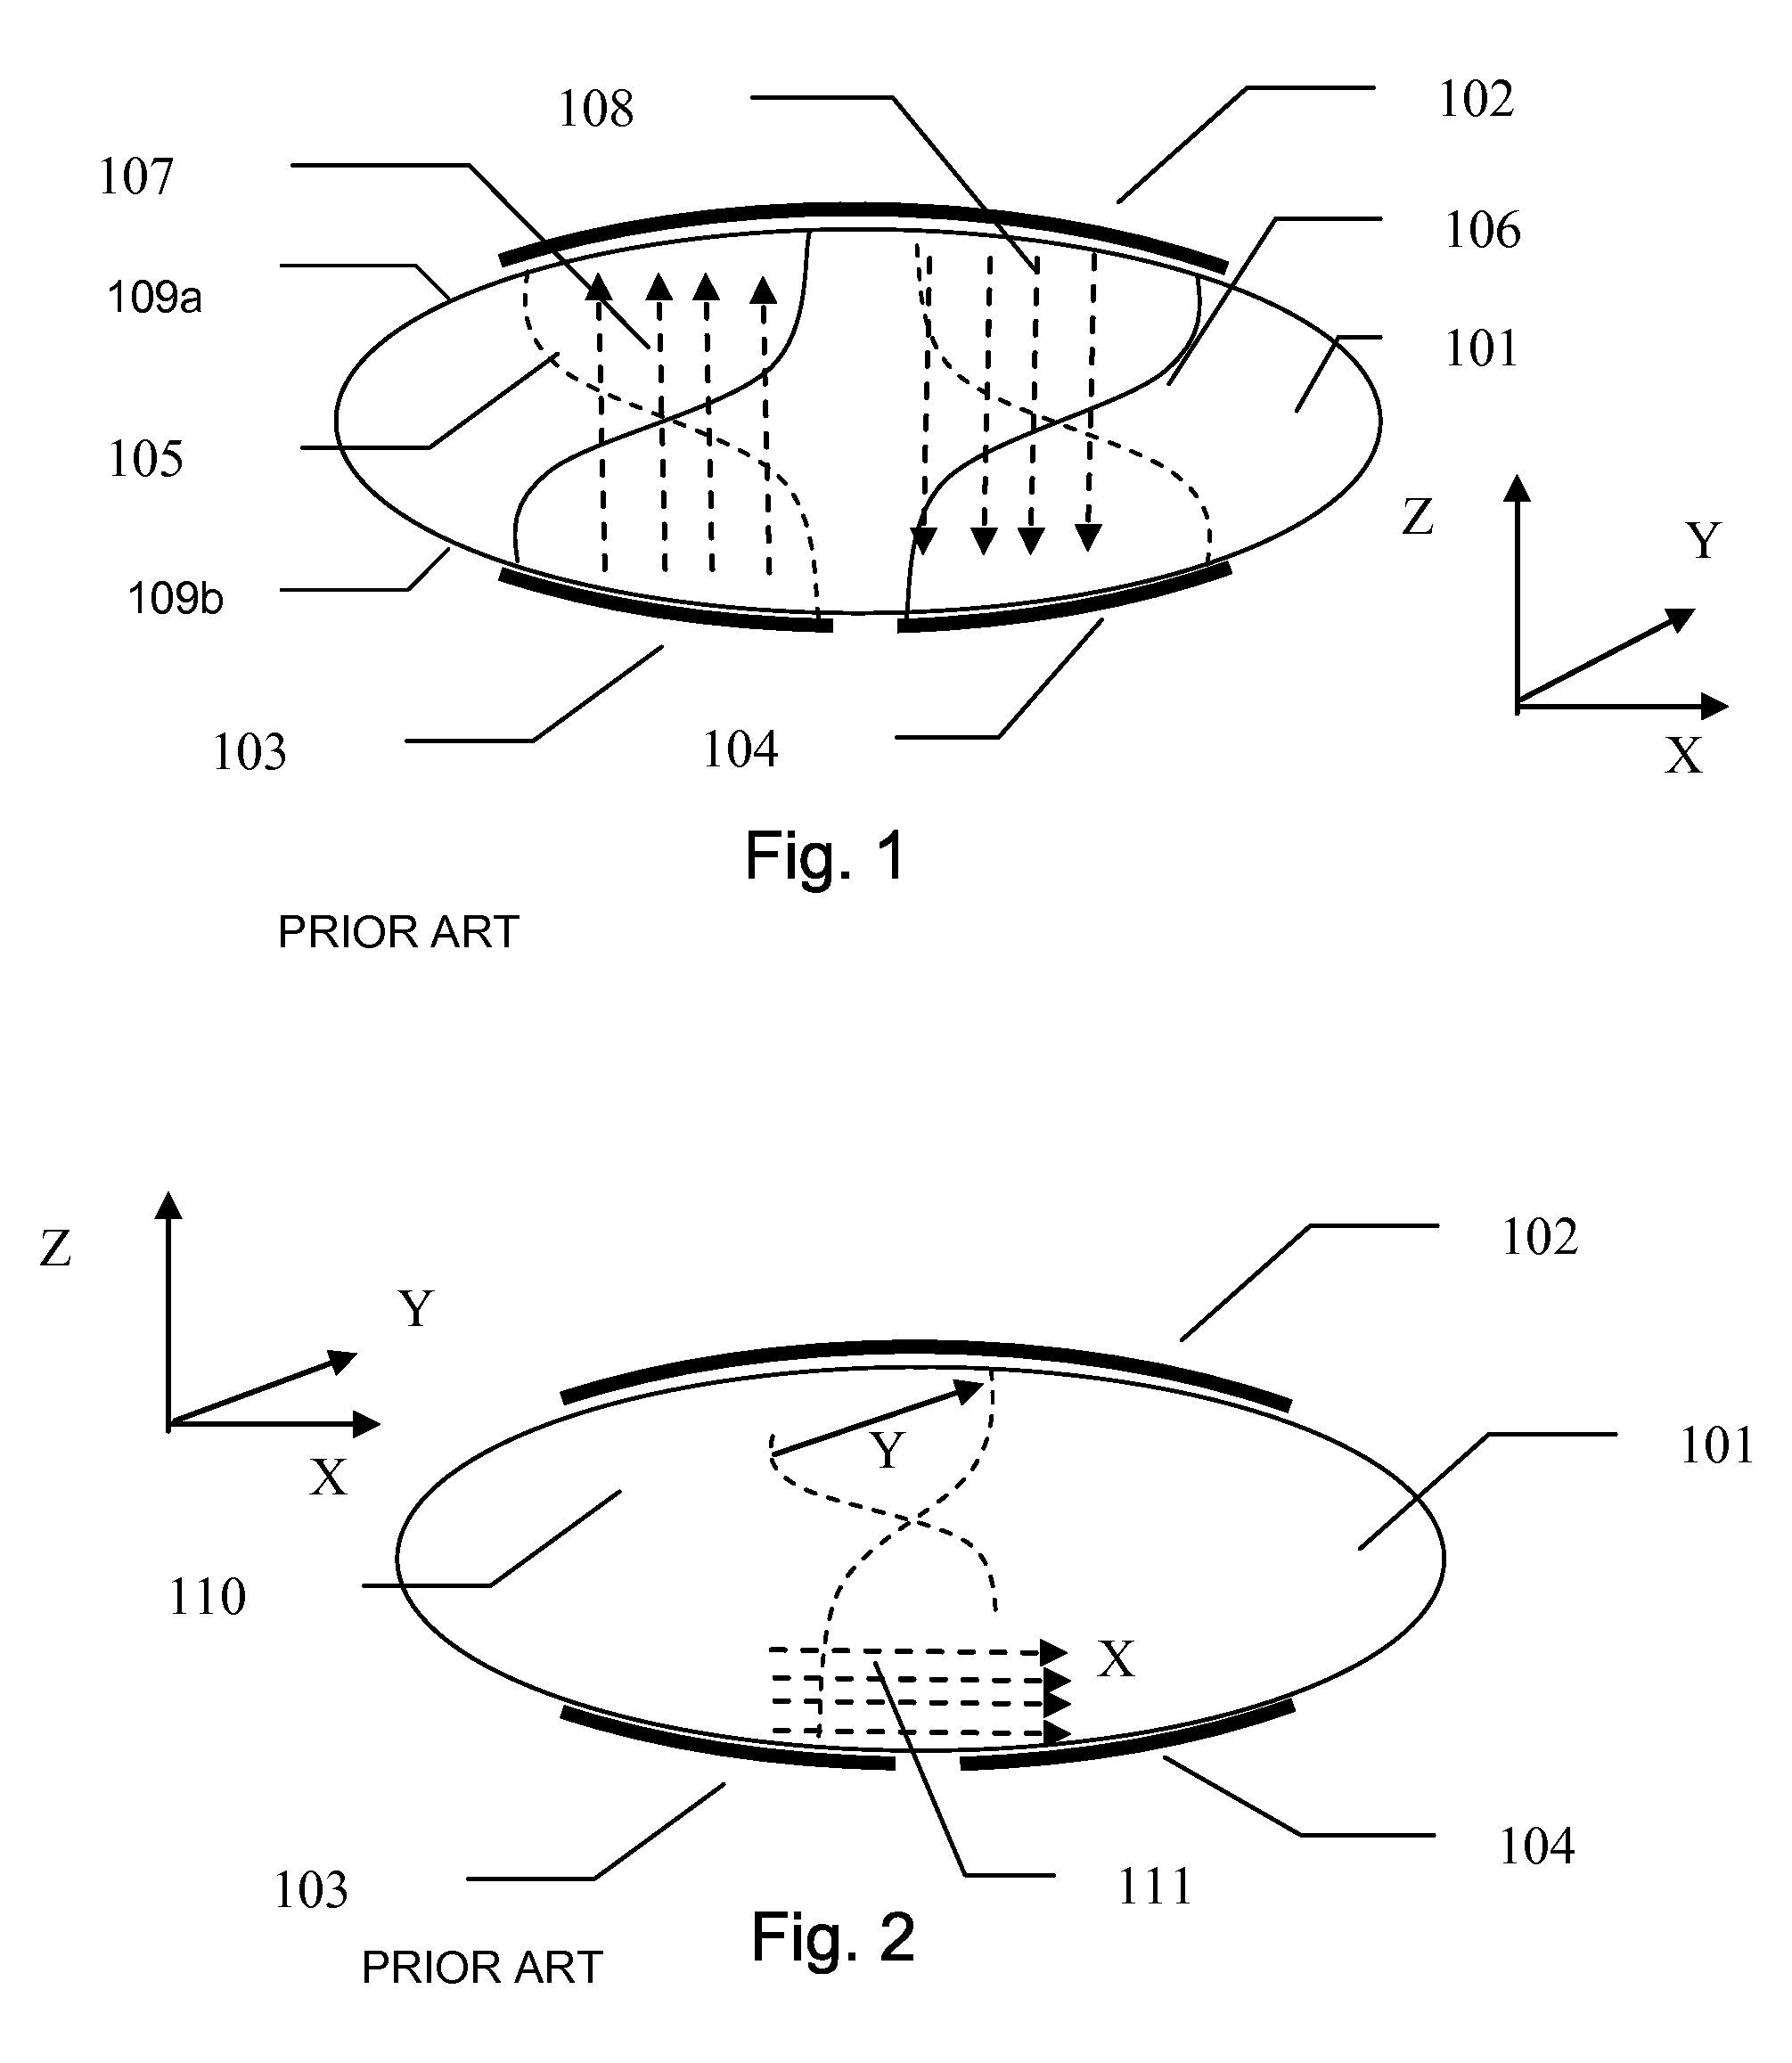 Lateral Excitation of Pure Shear Modes